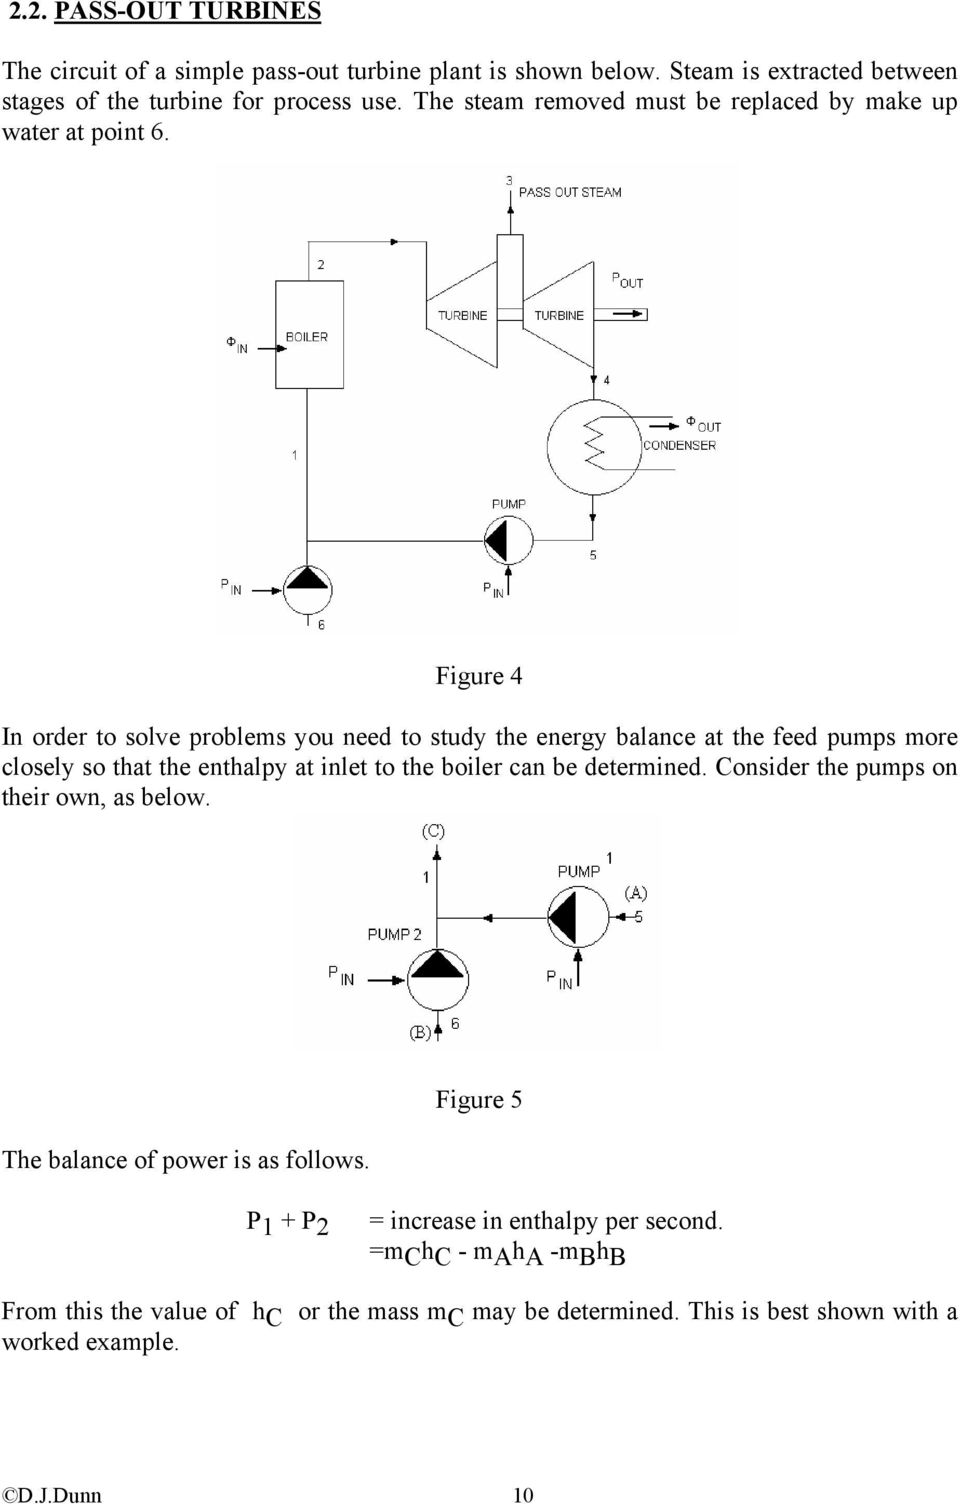 Figure 4 In order to solve problems you need to study the energy balance at the feed pumps more closely so that the enthalpy at inlet to the boiler can be